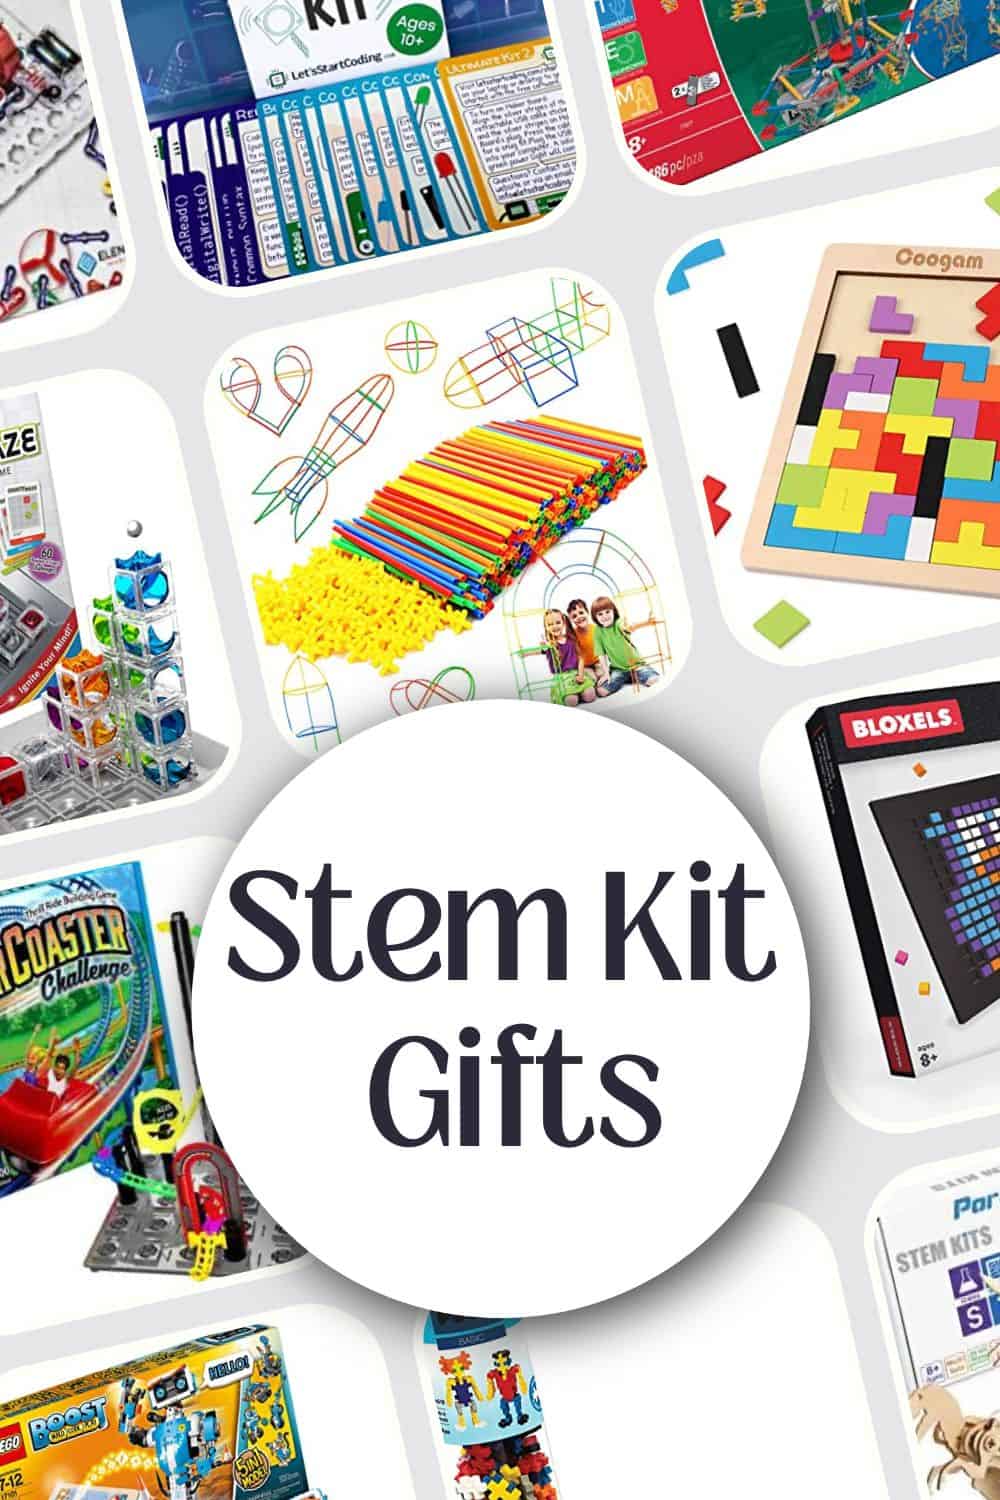 A collage of images of STEM kits appropriate for middle school kids.